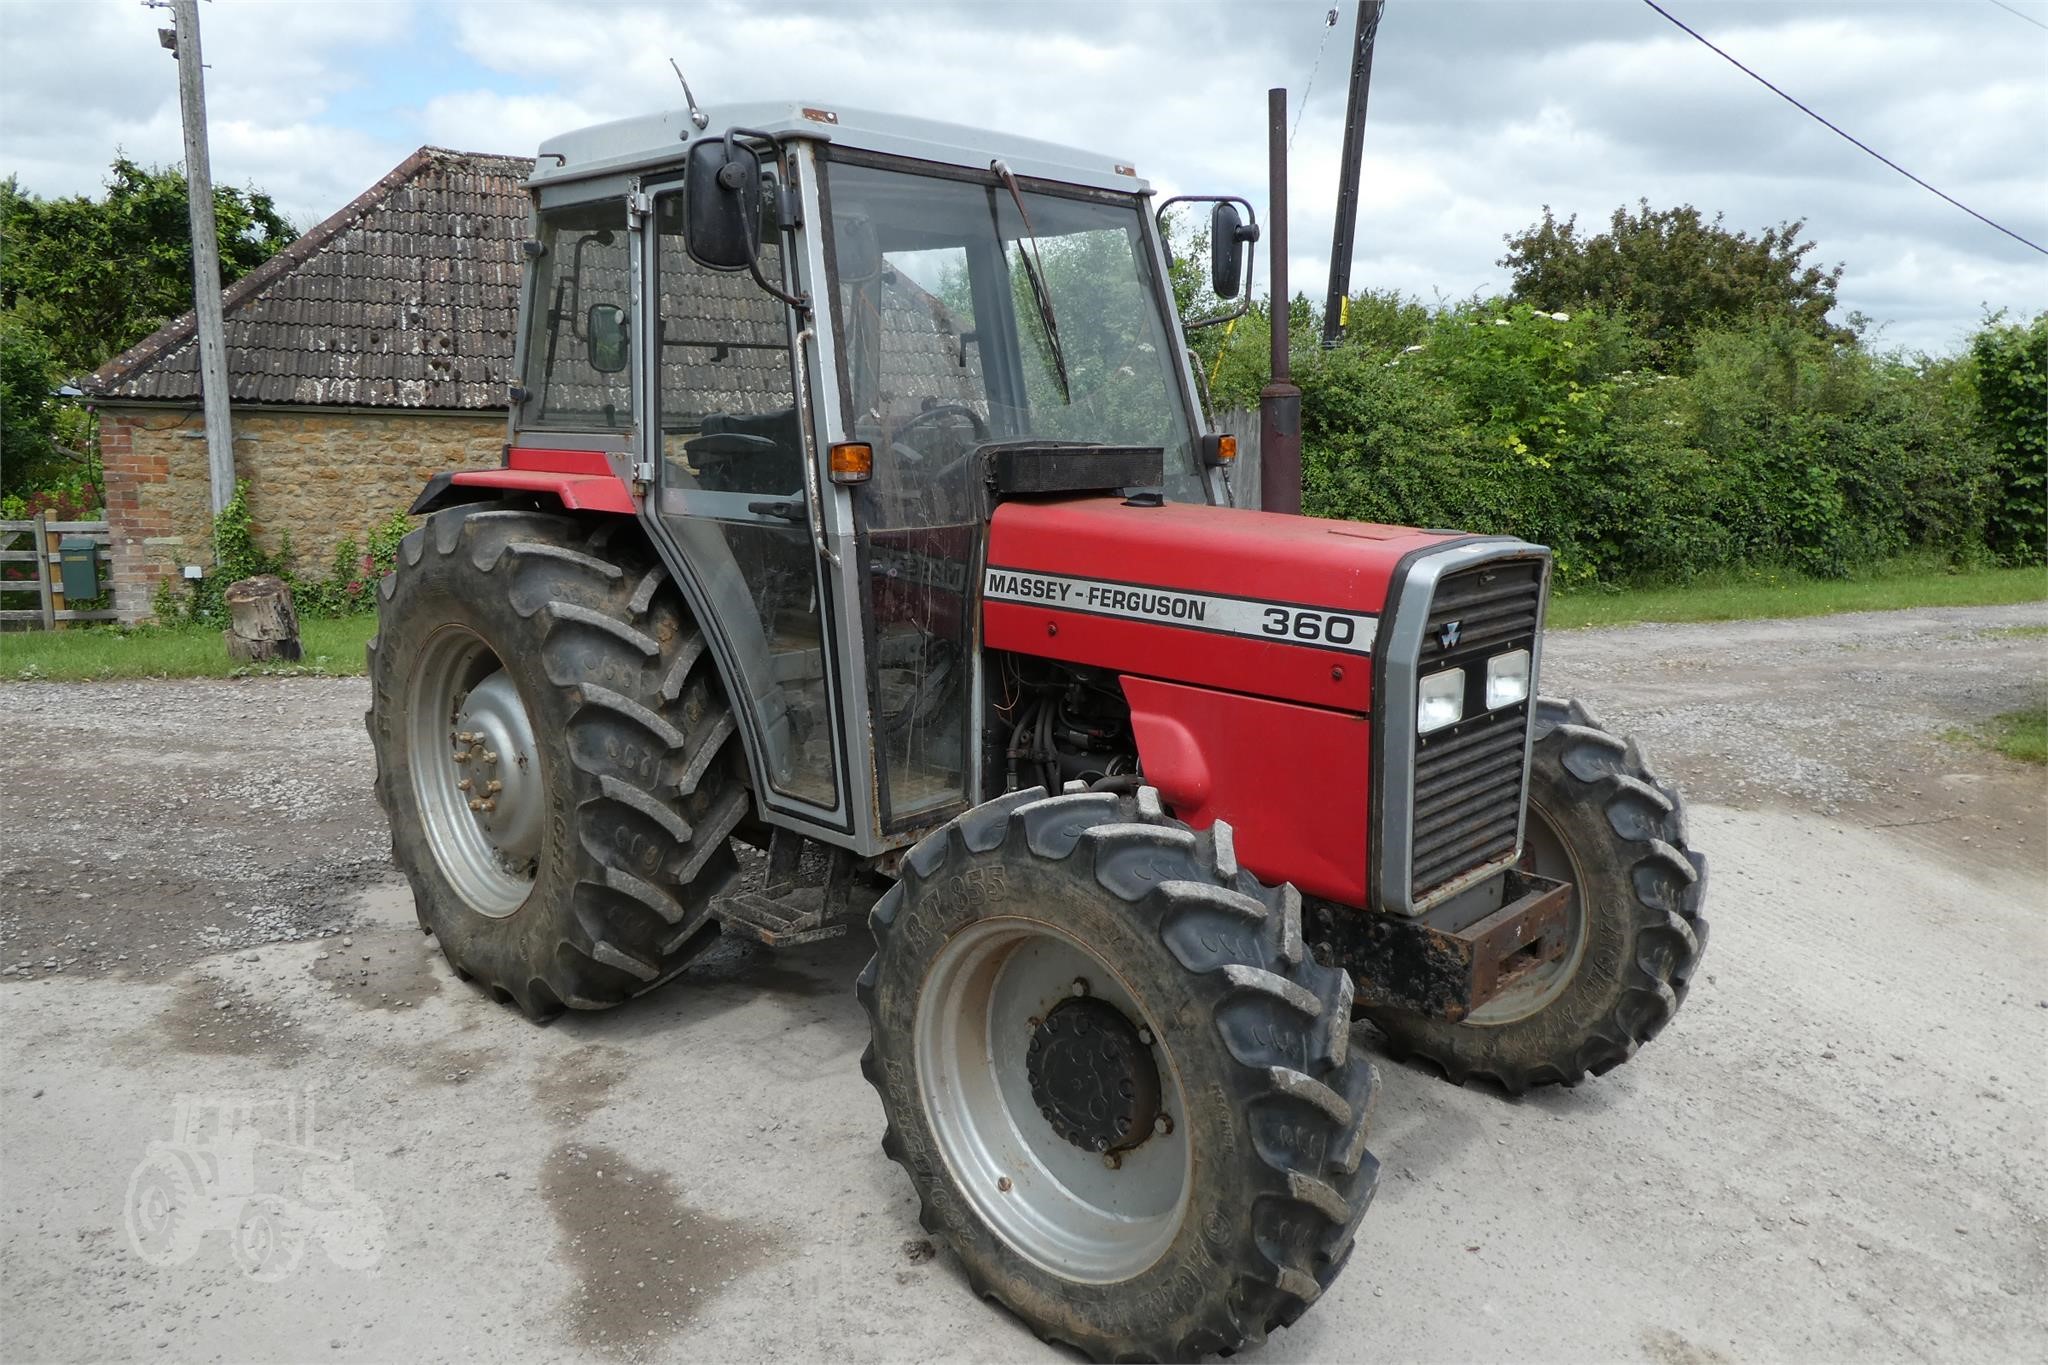 Massey Ferguson 360 For Sale 1 Listings Tractorhouse Com Page 1 Of 1